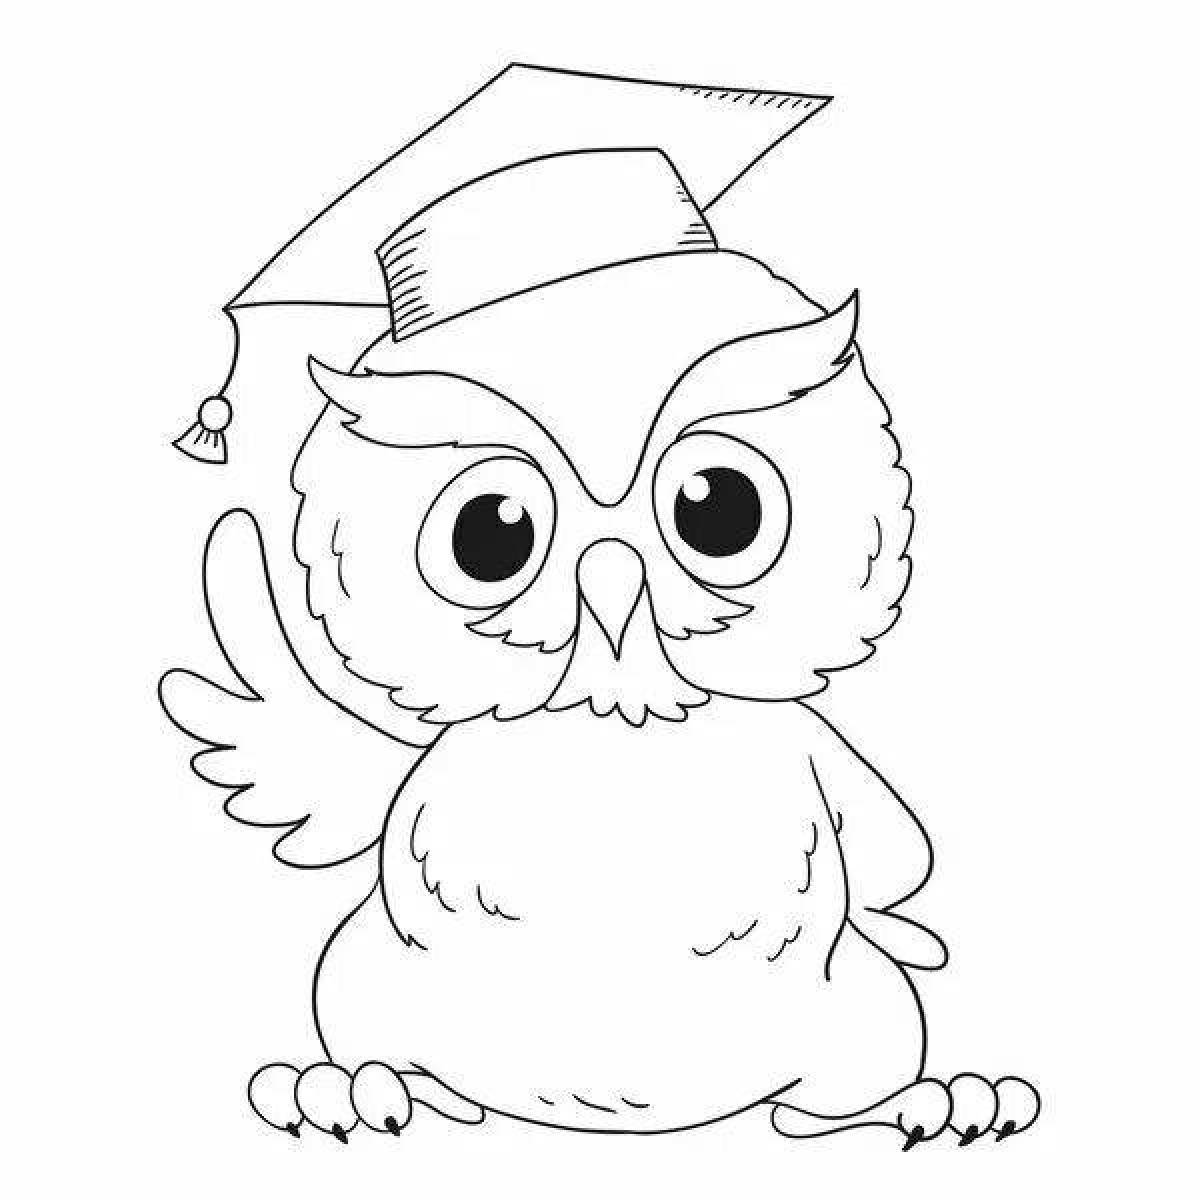 Coloring book wise owl with a book